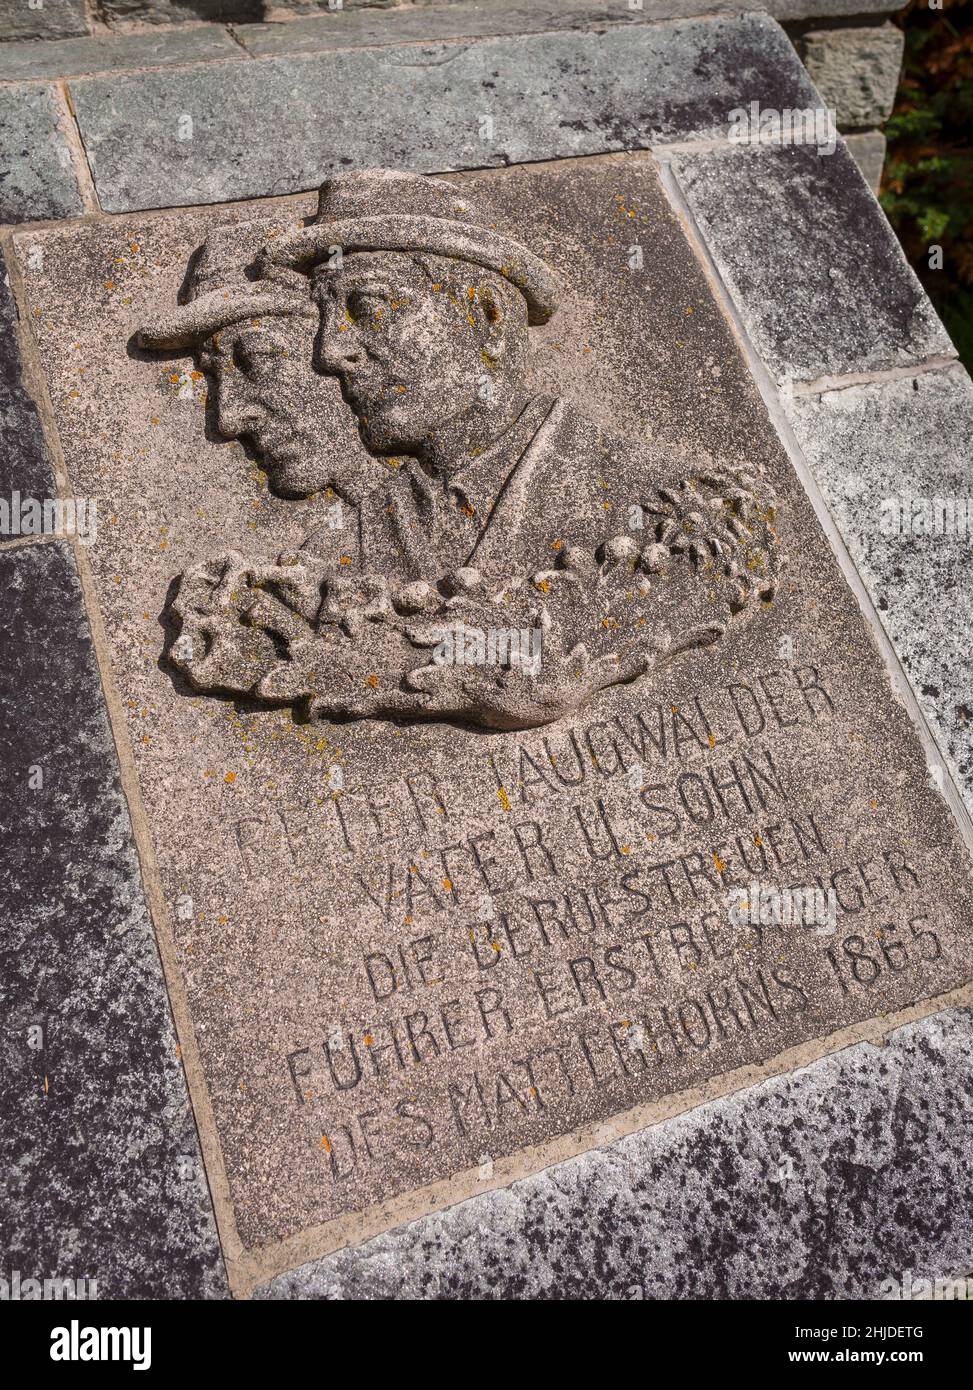 ZERMATT, SWITZERLAND - Memorial for father and son climbers Peter and Peter Taugwalder, Mountaineers' Cemetery, mountain climbers graveyard. Stock Photo